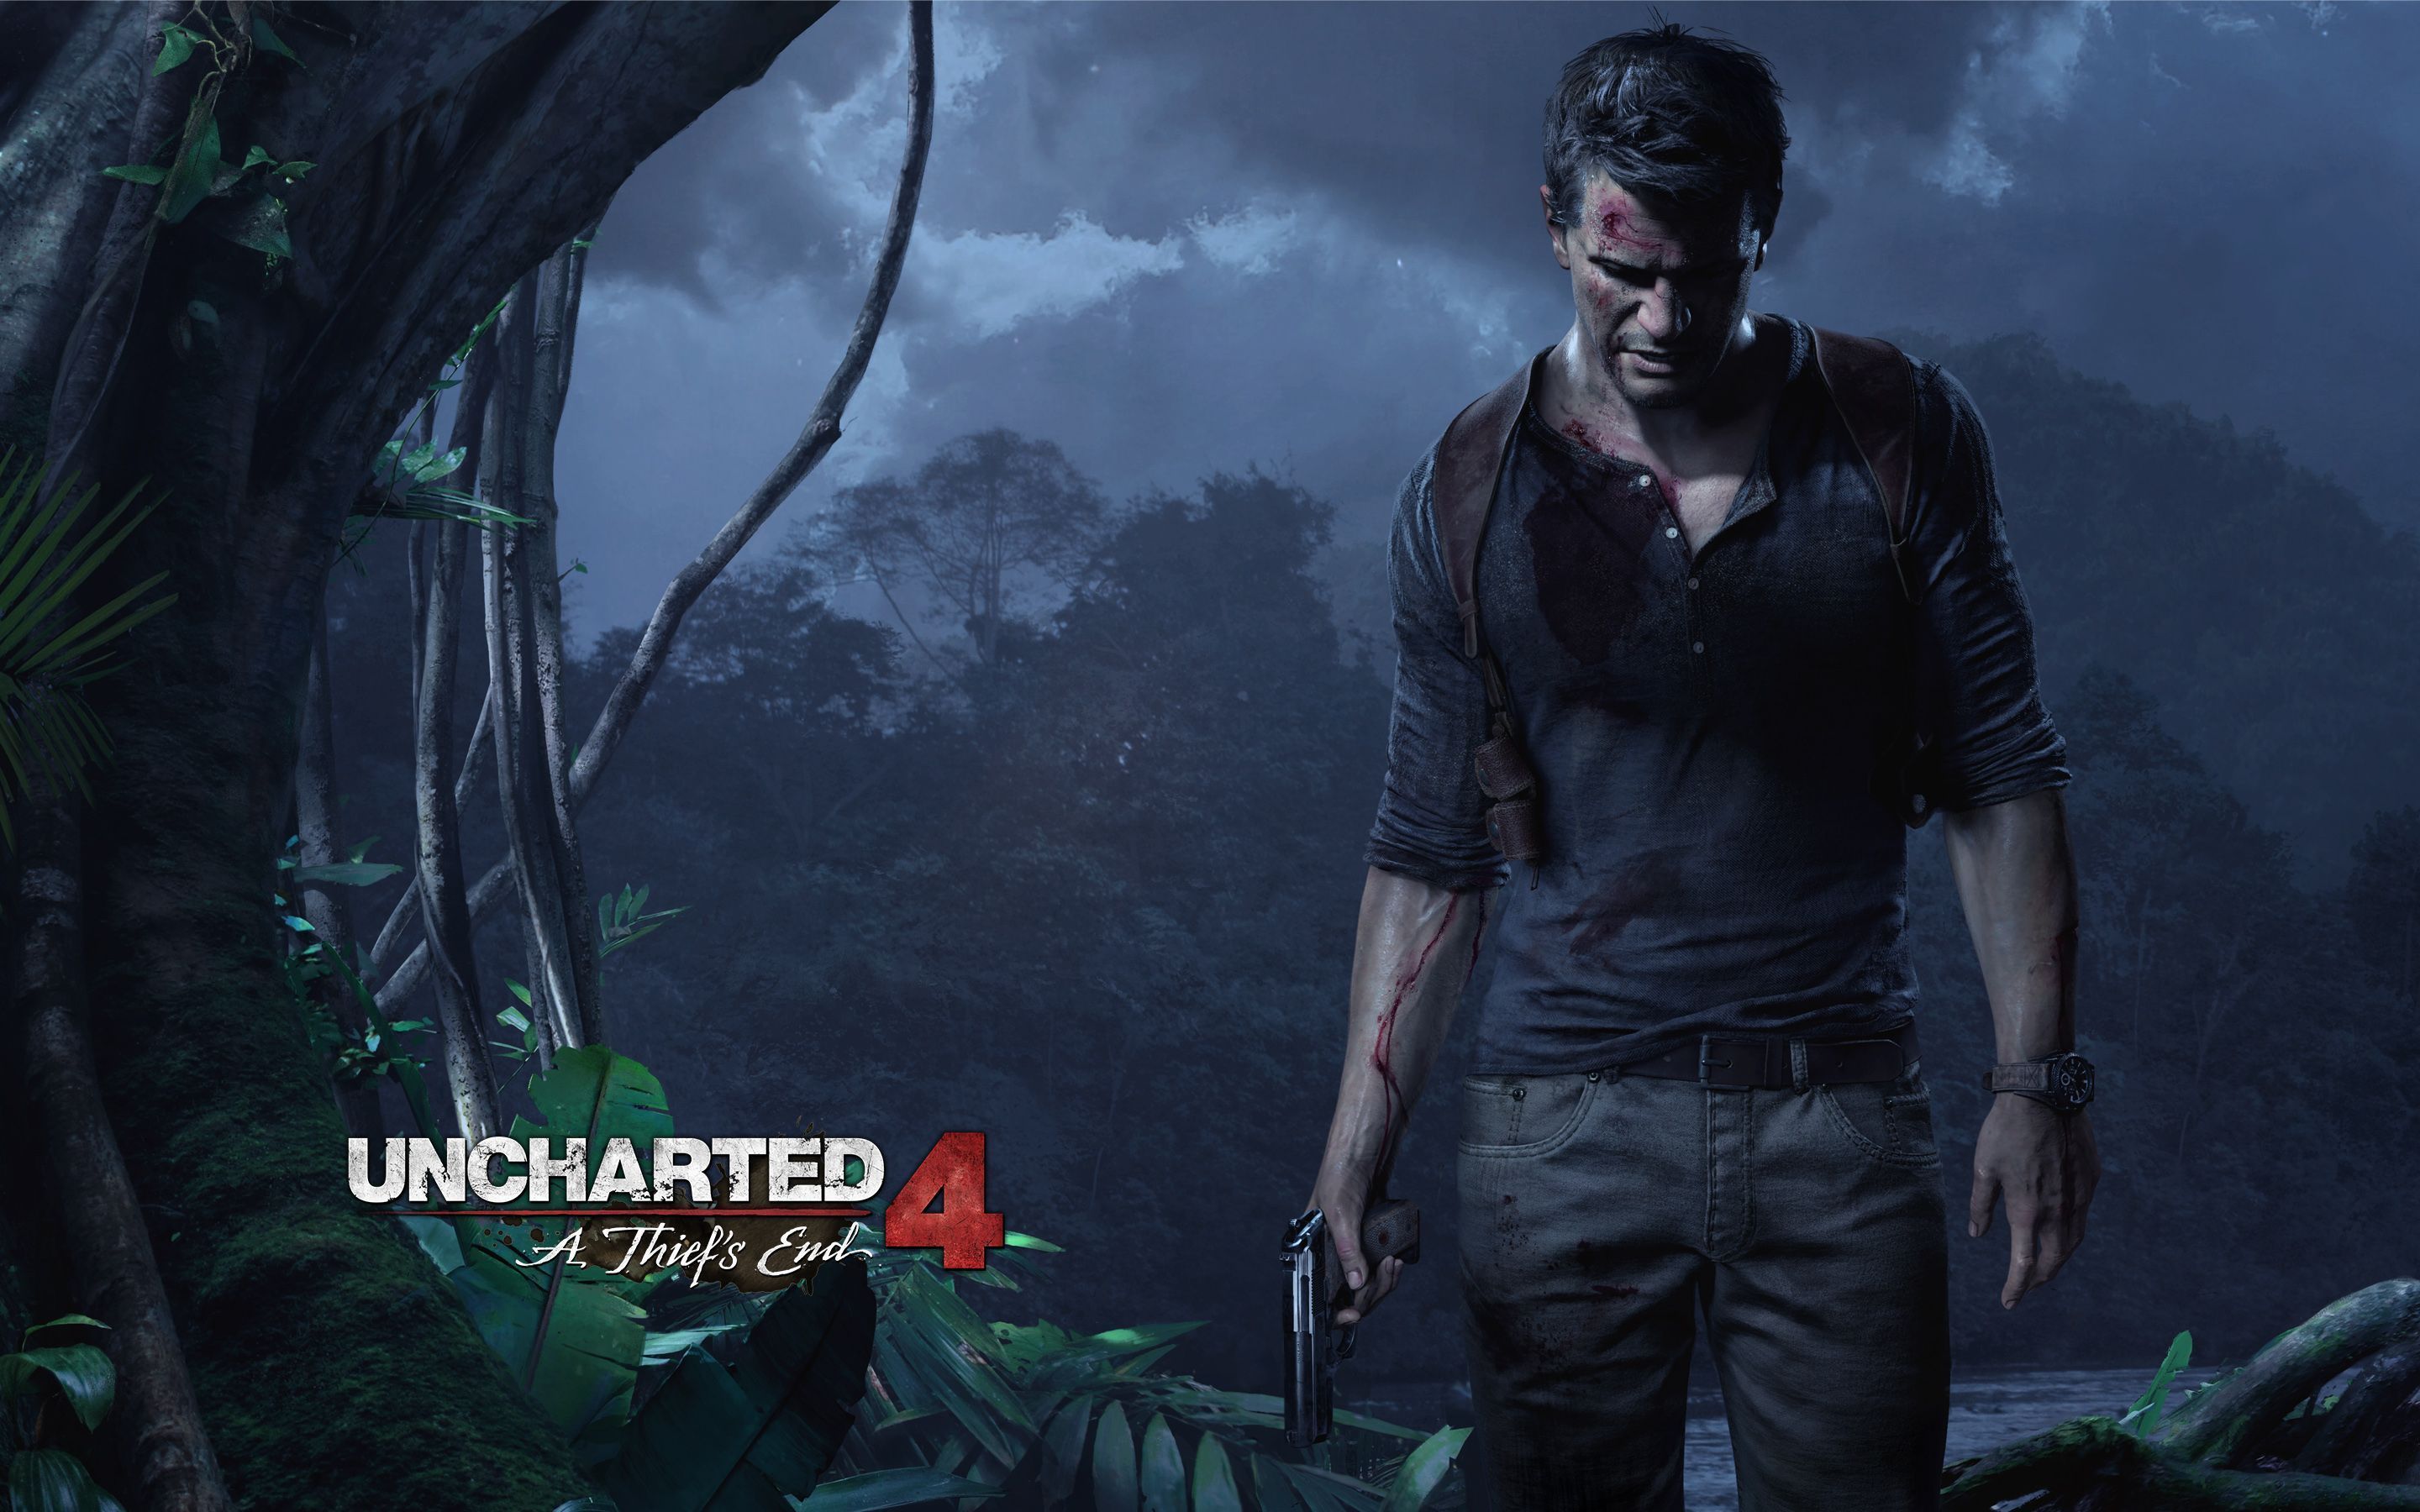 Uncharted 4 A Thiefs End Game Wallpapers HD Backgrounds